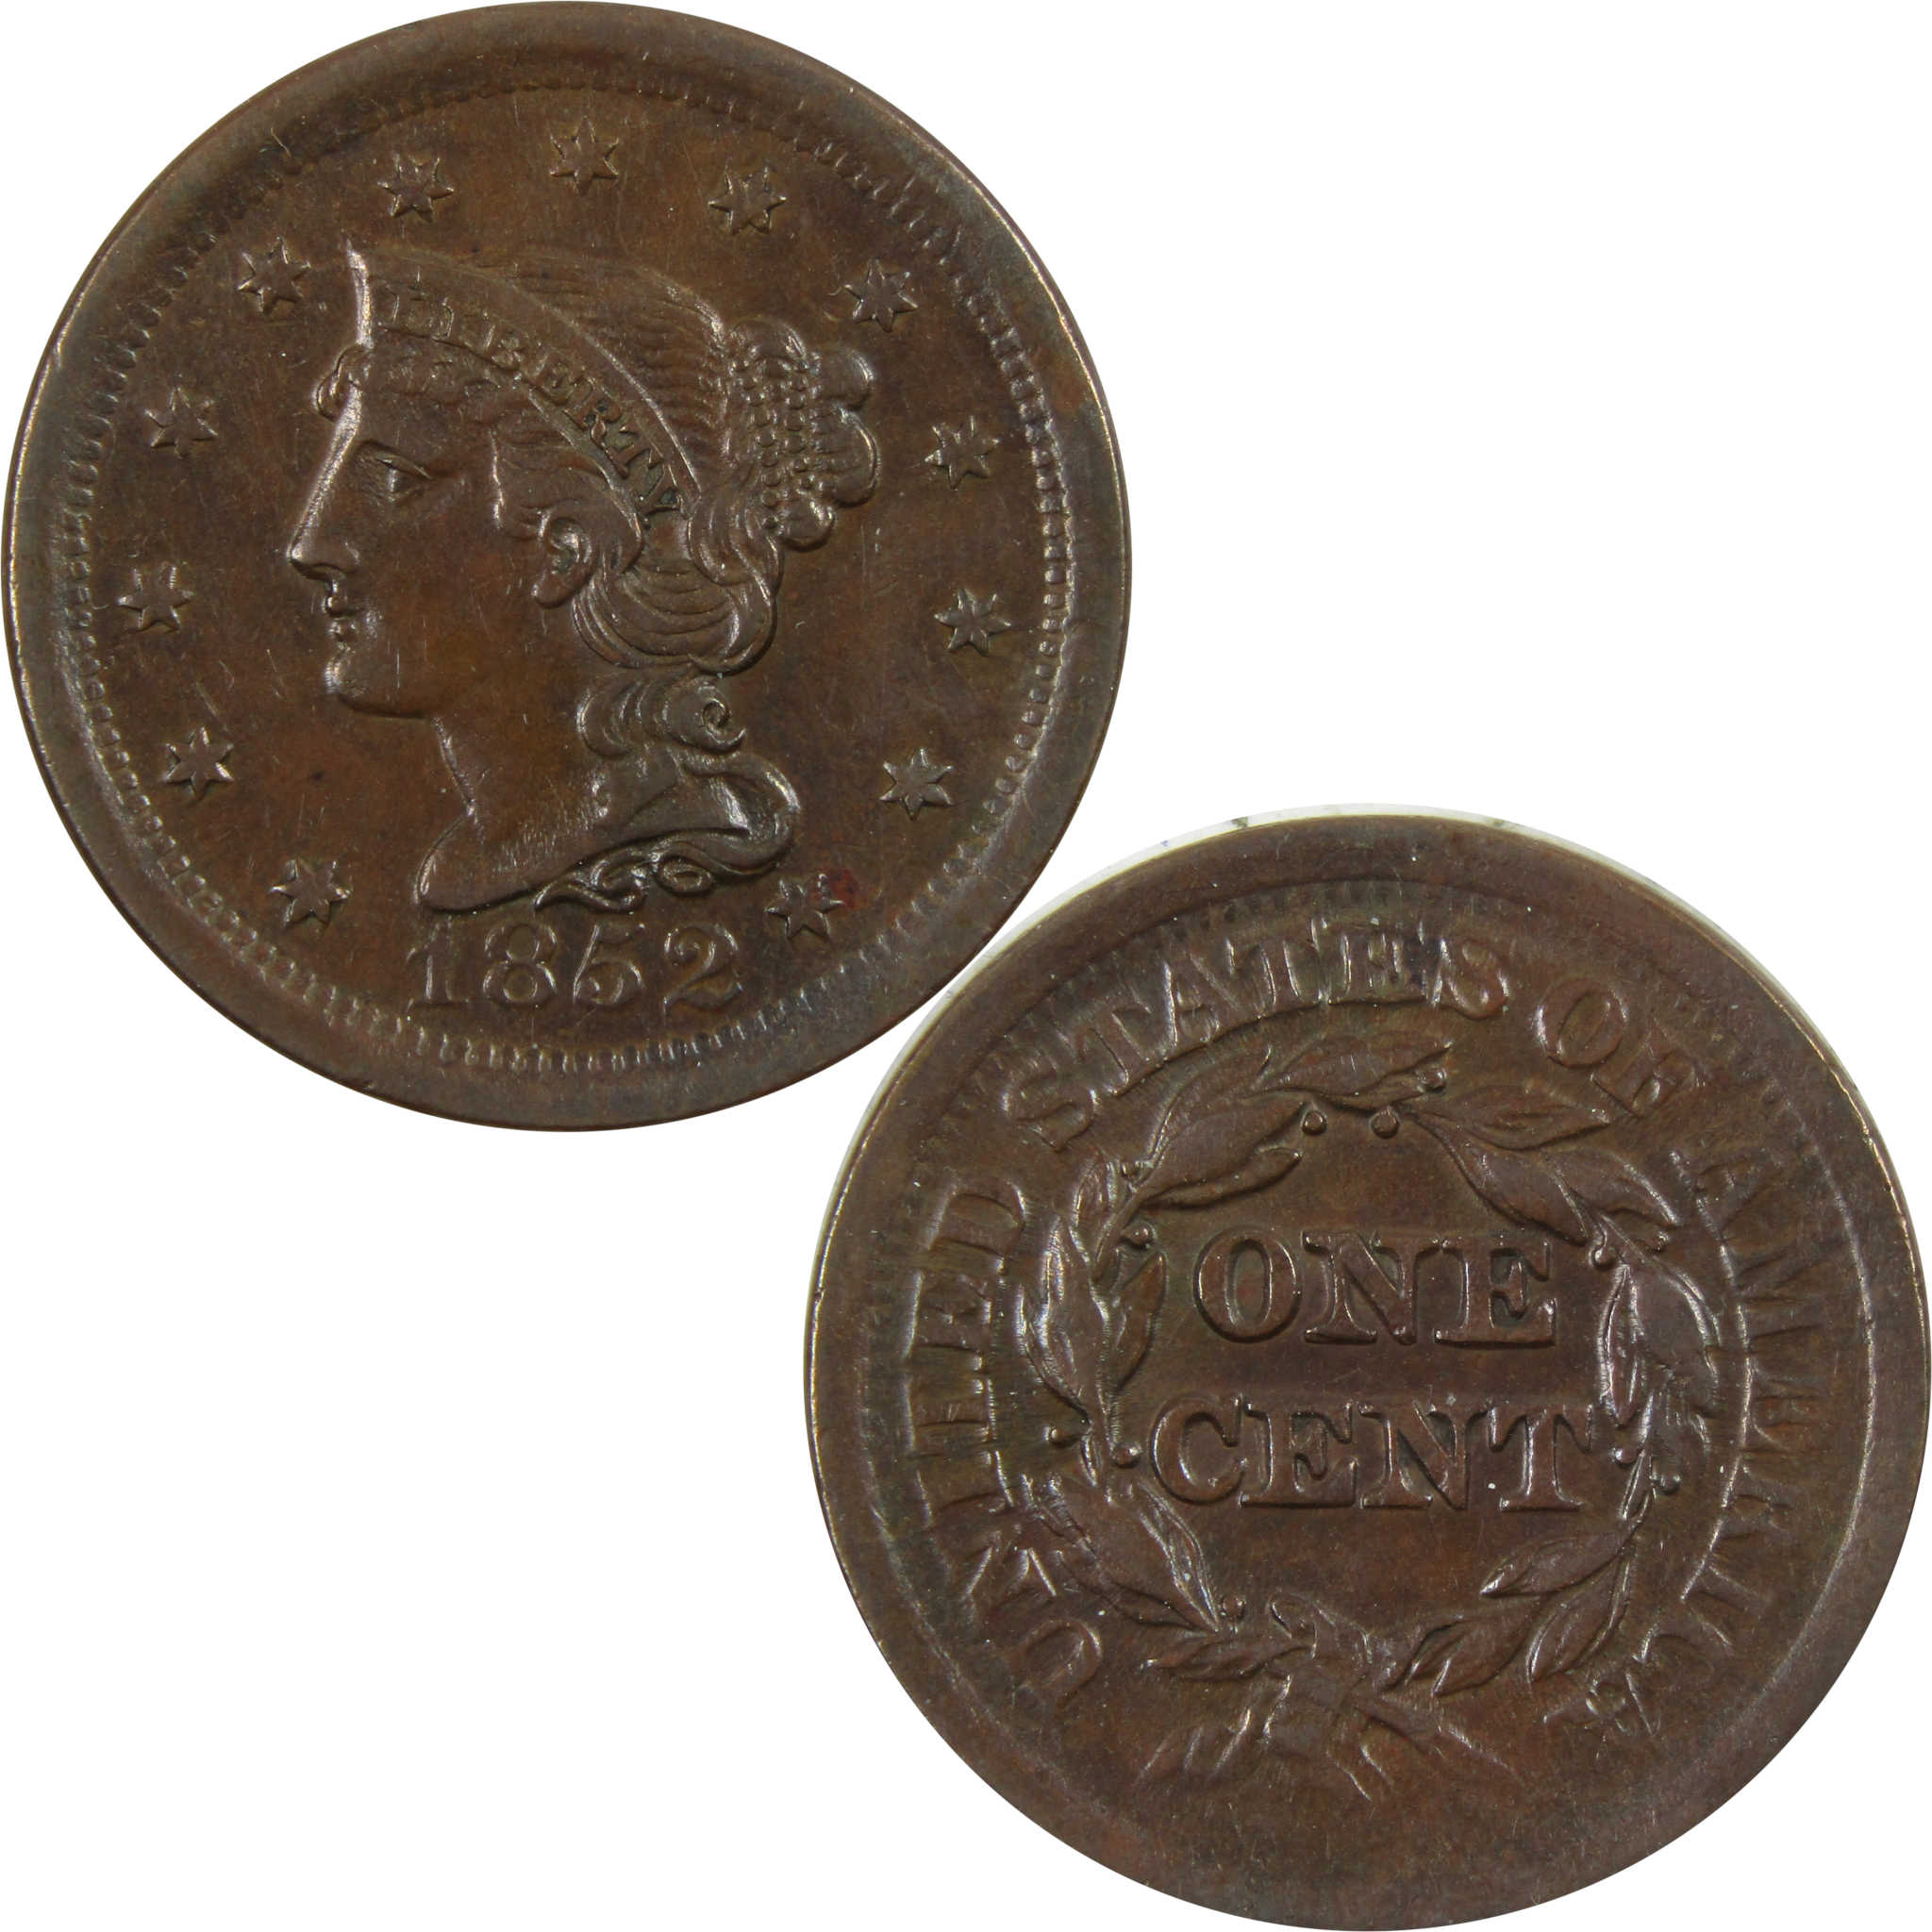 1852 Braided Hair Large Cent AU About Unc Copper Penny SKU:I4721